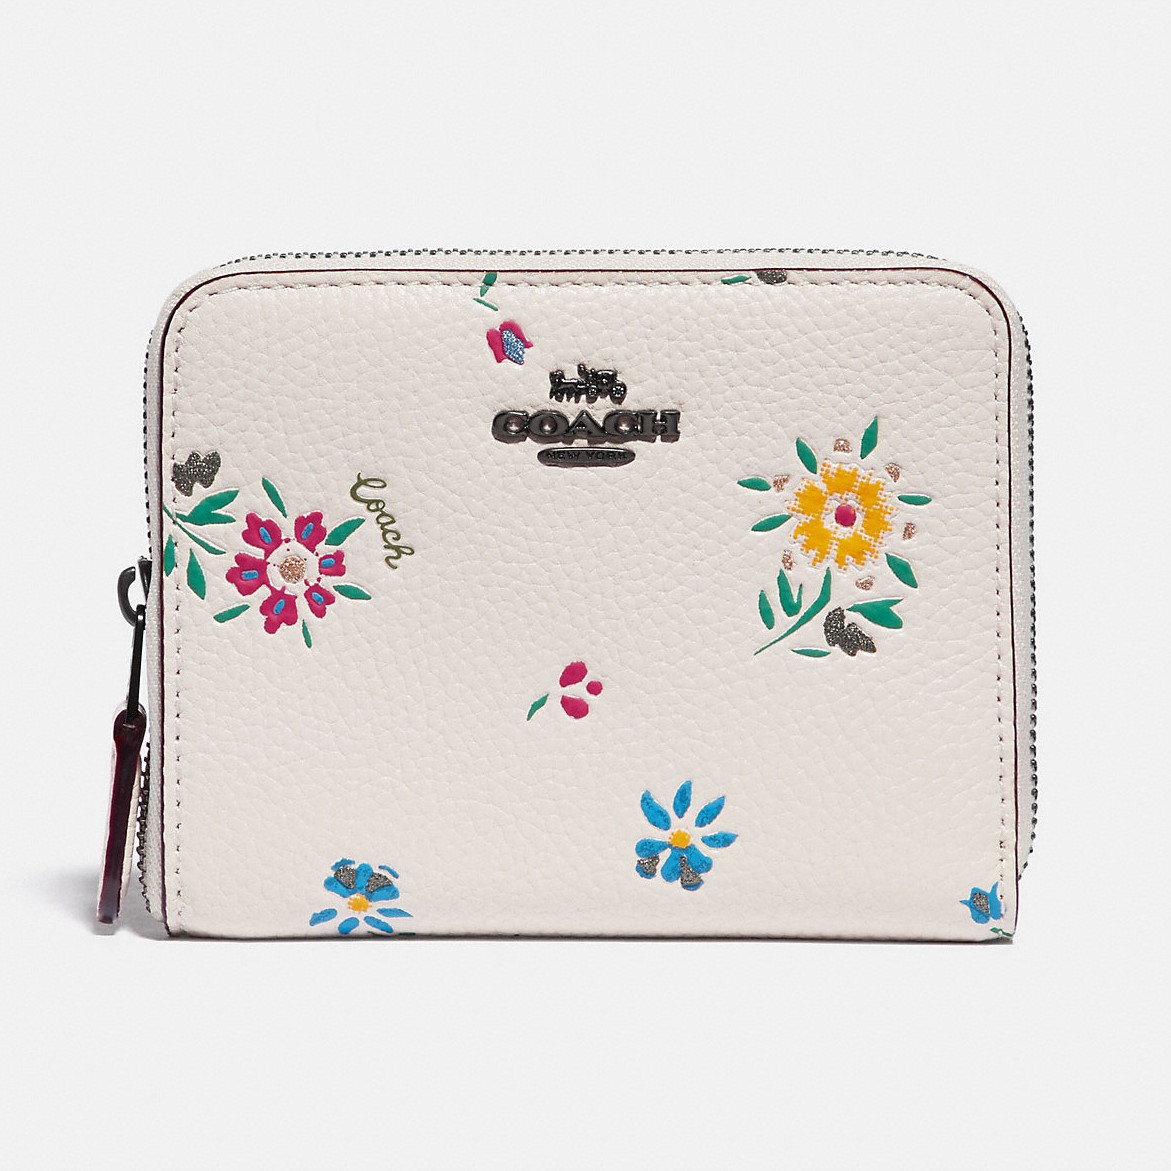 VÍ COACH SMALL ZIP AROUND WALLET WITH WILDFLOWER PRINT 6